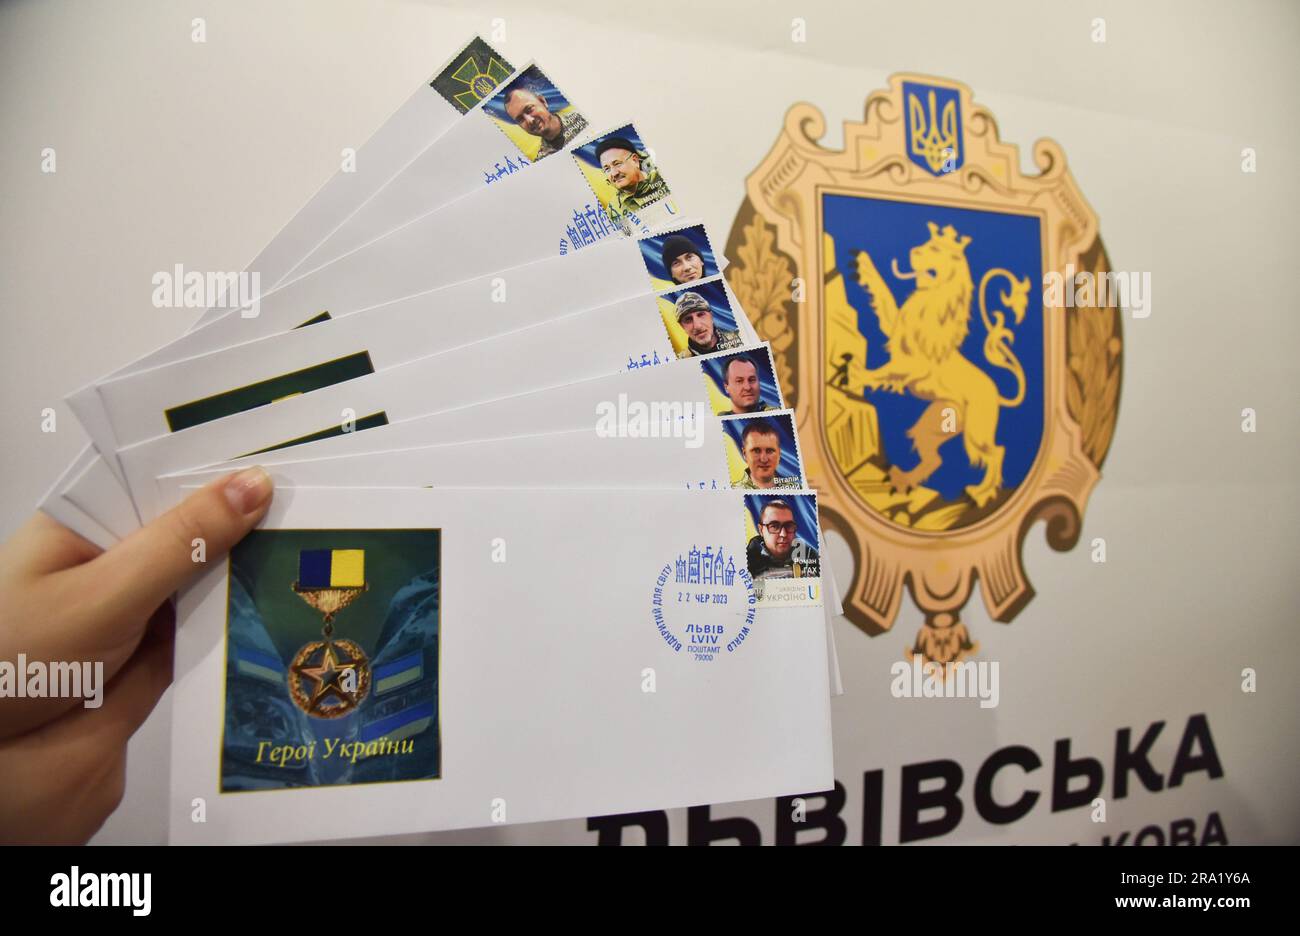 Stamps with the image of Ukrainian border guards killed by the Russian military, who were posthumously awarded the title of Hero of Ukraine, pasted on envelopes against the background of the coat of arms of the Lviv region. In honor of the killed Ukrainian border guards, the Russian army issued stamps. This happened on the initiative of the public organization 'Community in Action' and 'Ukrposhta'. The stamps were dedicated to eight Heroes of Ukraine, border guards received this title posthumously. The stamps were redeemed in the presence of two families of fallen Heroes of Ukraine - Roman Gak Stock Photo